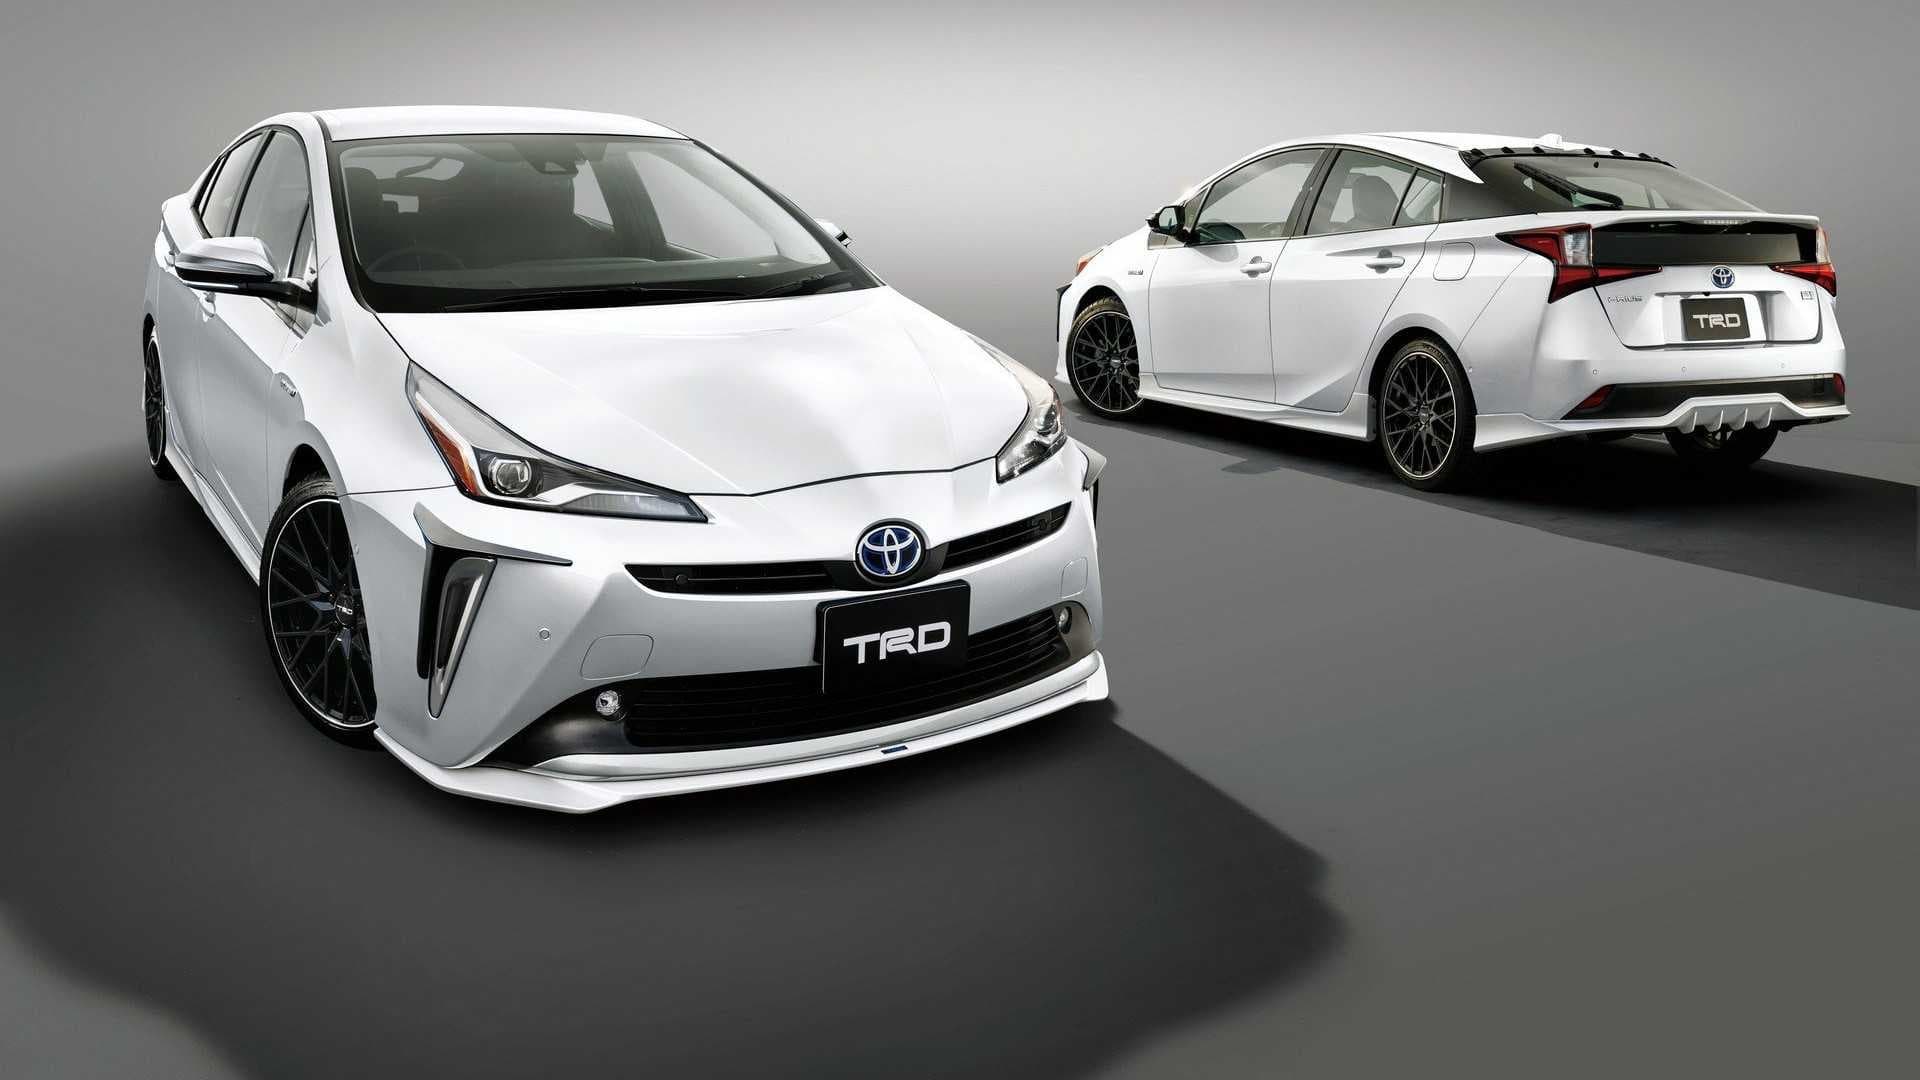 Toyota’s TRD Got Its Hands on the Prius, Made it More Aggressive and Aerodynamic